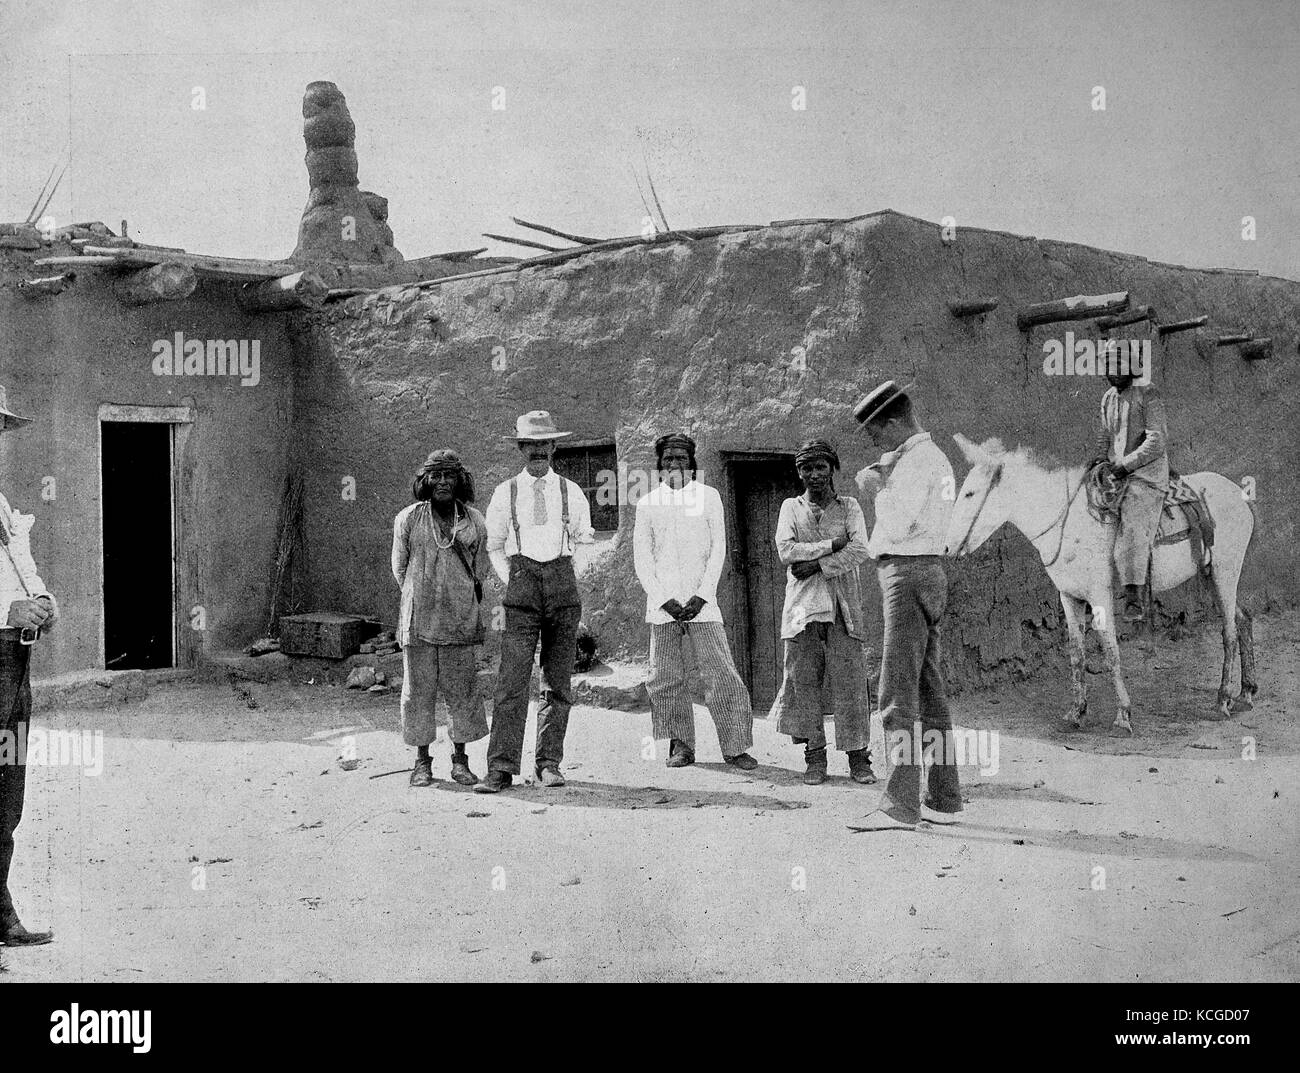 United States of America, descendants of the ancient Aztecs and descendants of the Spanish conquerors in front of an adobe house in New Mexico, digital improved reproduction of a historical photo from the (estimated) year 1899 Stock Photo